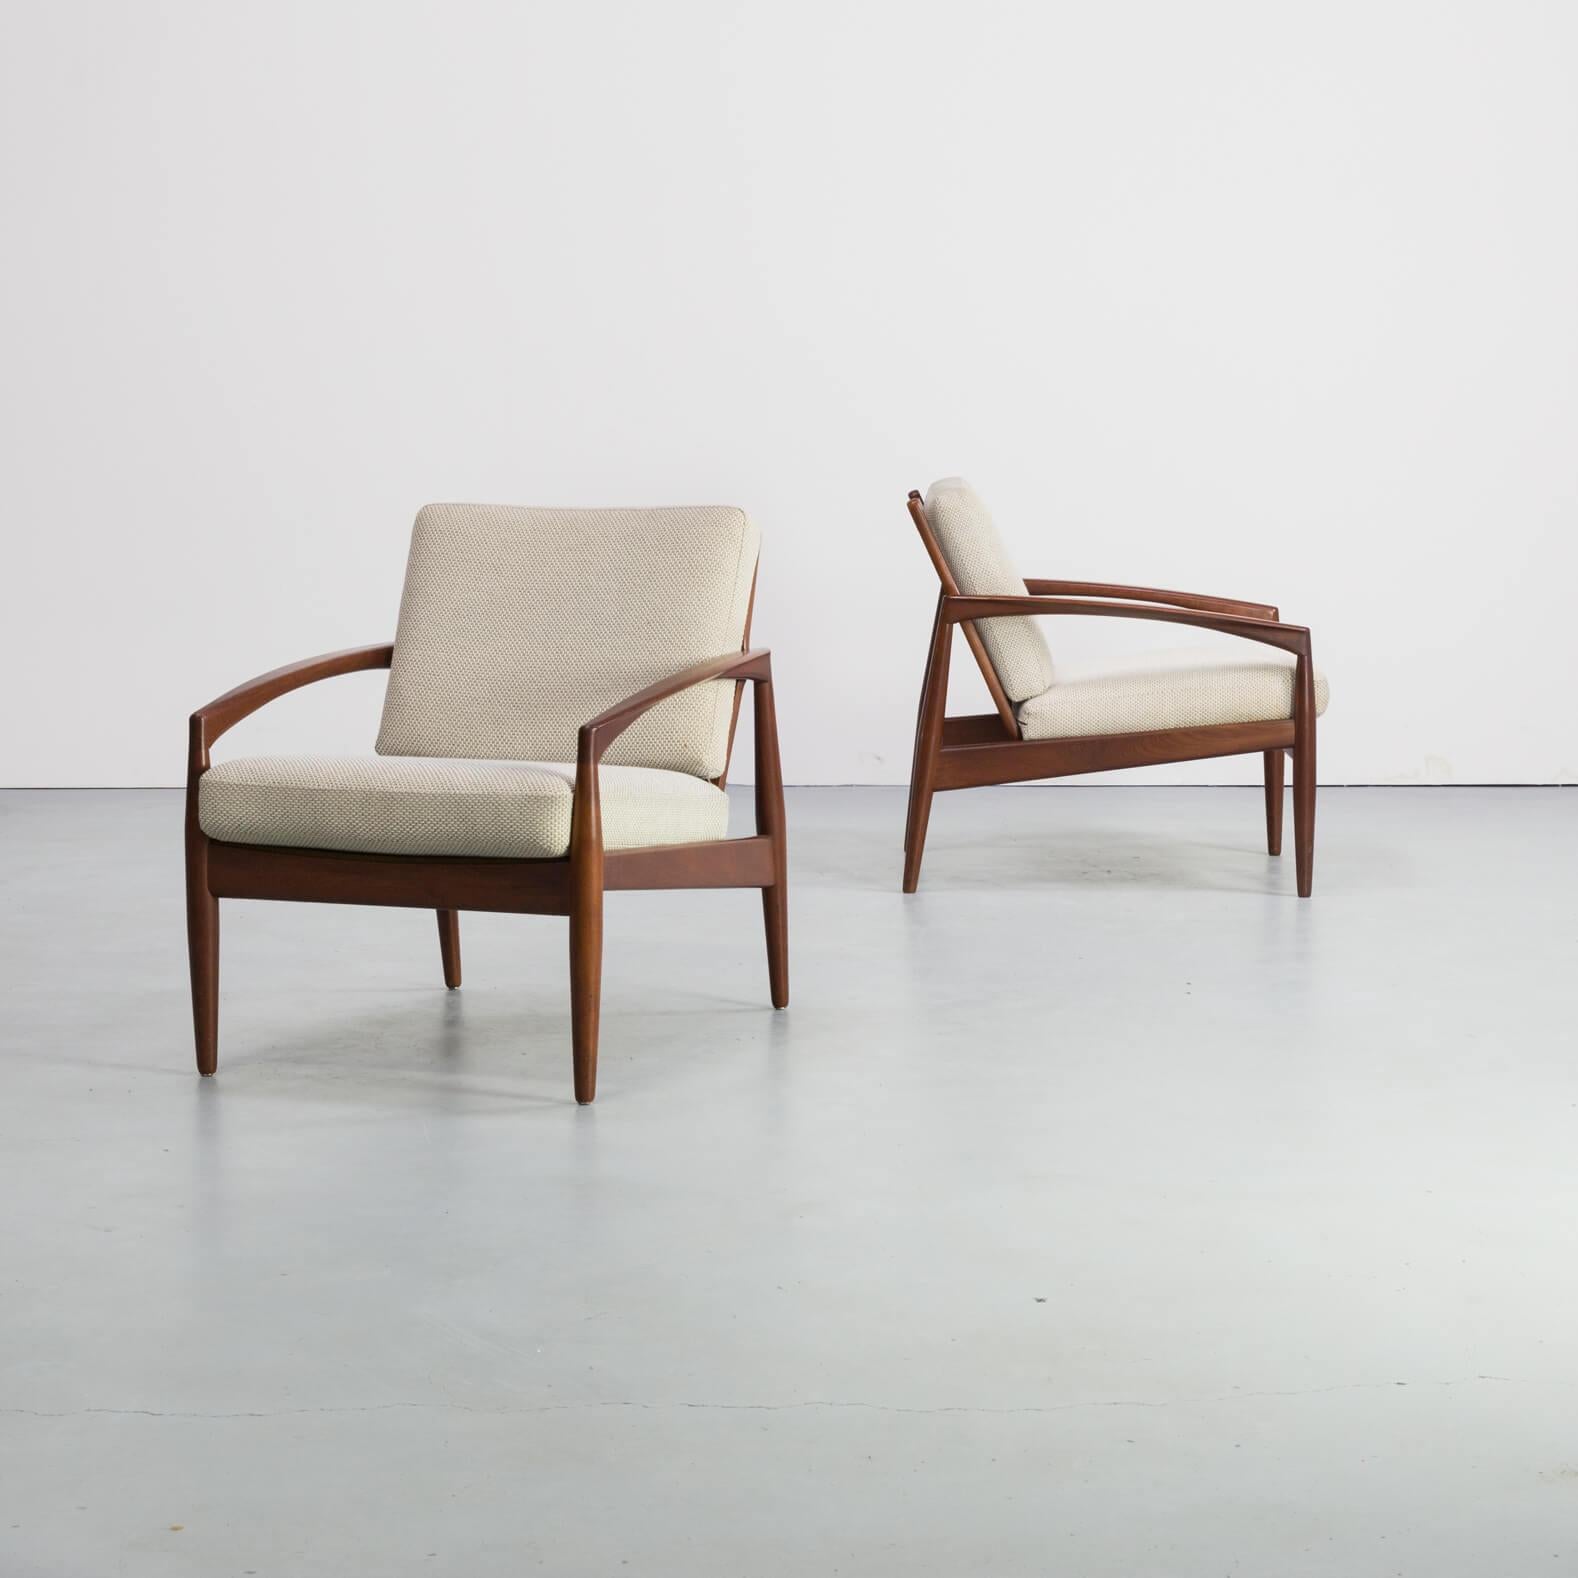 Danish designer Kai Kristiansen was born in 1929.
Kai started with cabinetmaking before he went to the Royal Danish Academy of Fine Arts in Copenhagen under the highly influential designer Kaare Klint.
At the age of 26, Kristiansen opened his own